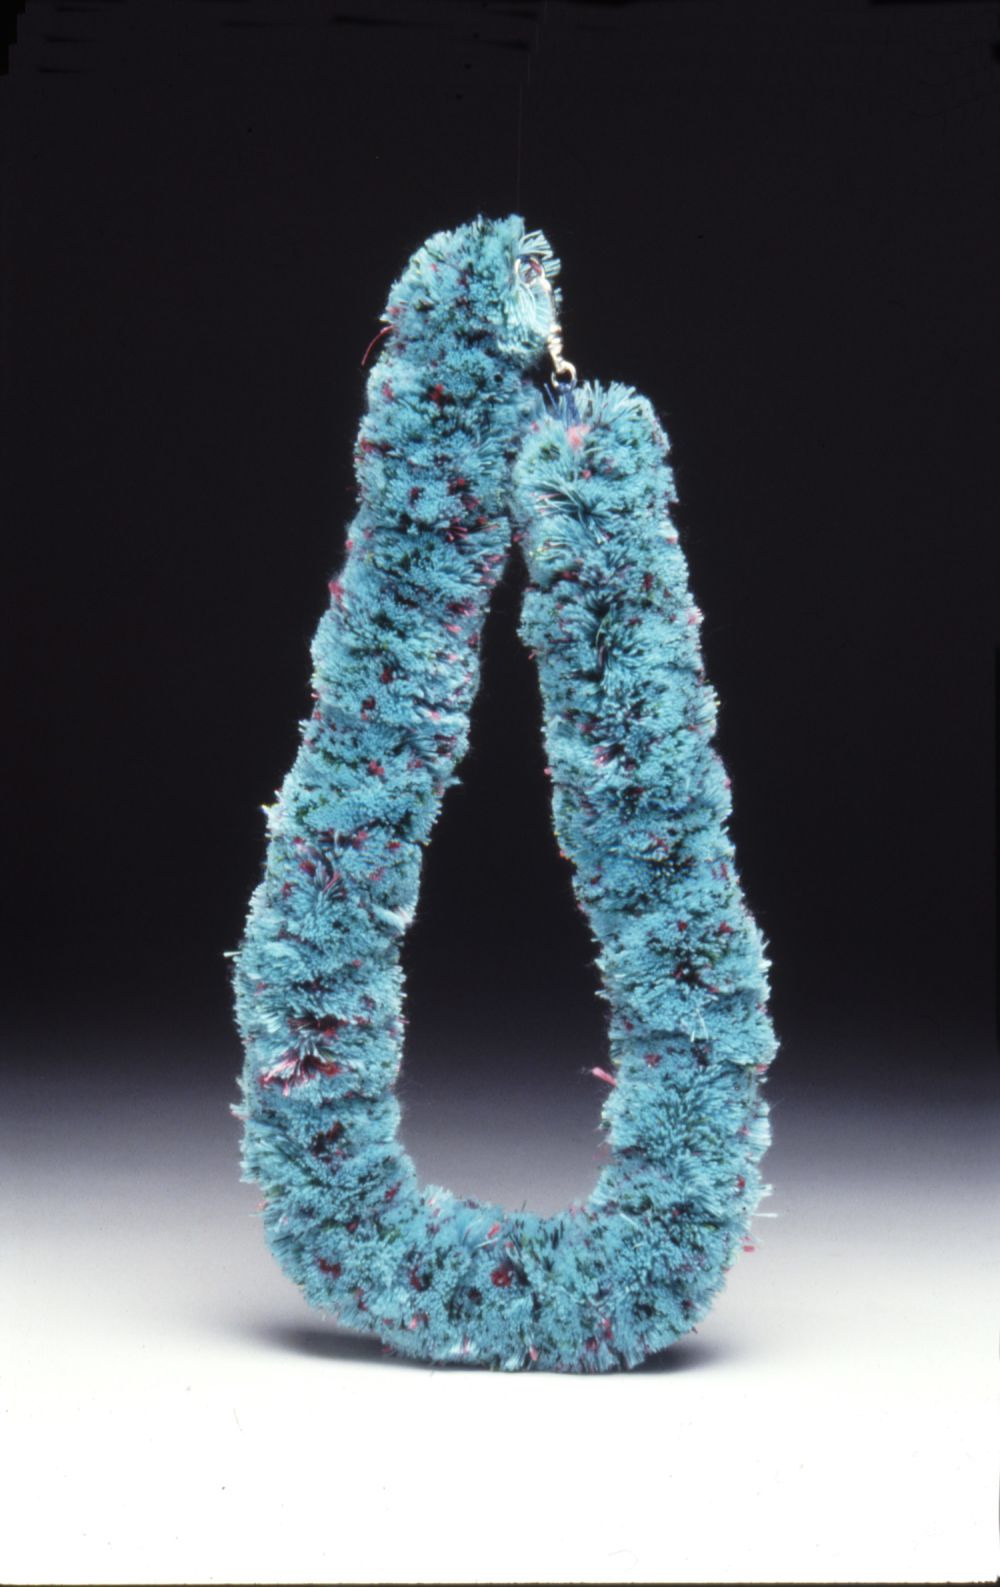 A woolly blue necklace